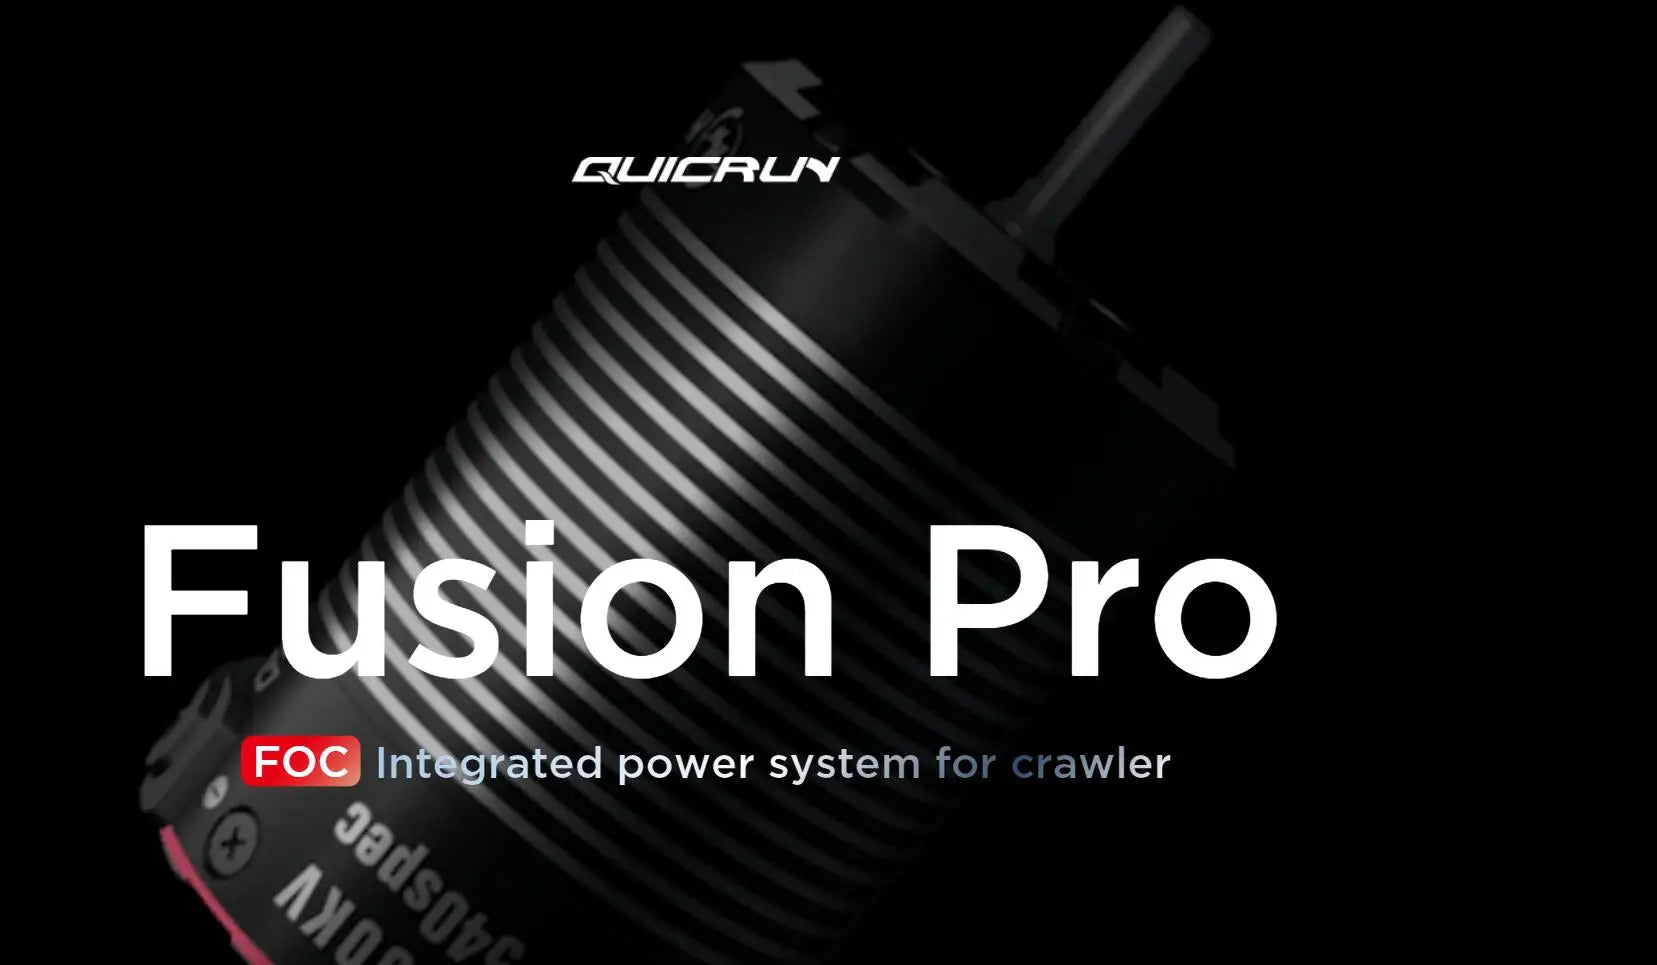 HobbyWing QuicRun Fusion Pro, DUICRUY Fusion Pro FOC) Integrated power system for crawler 'g